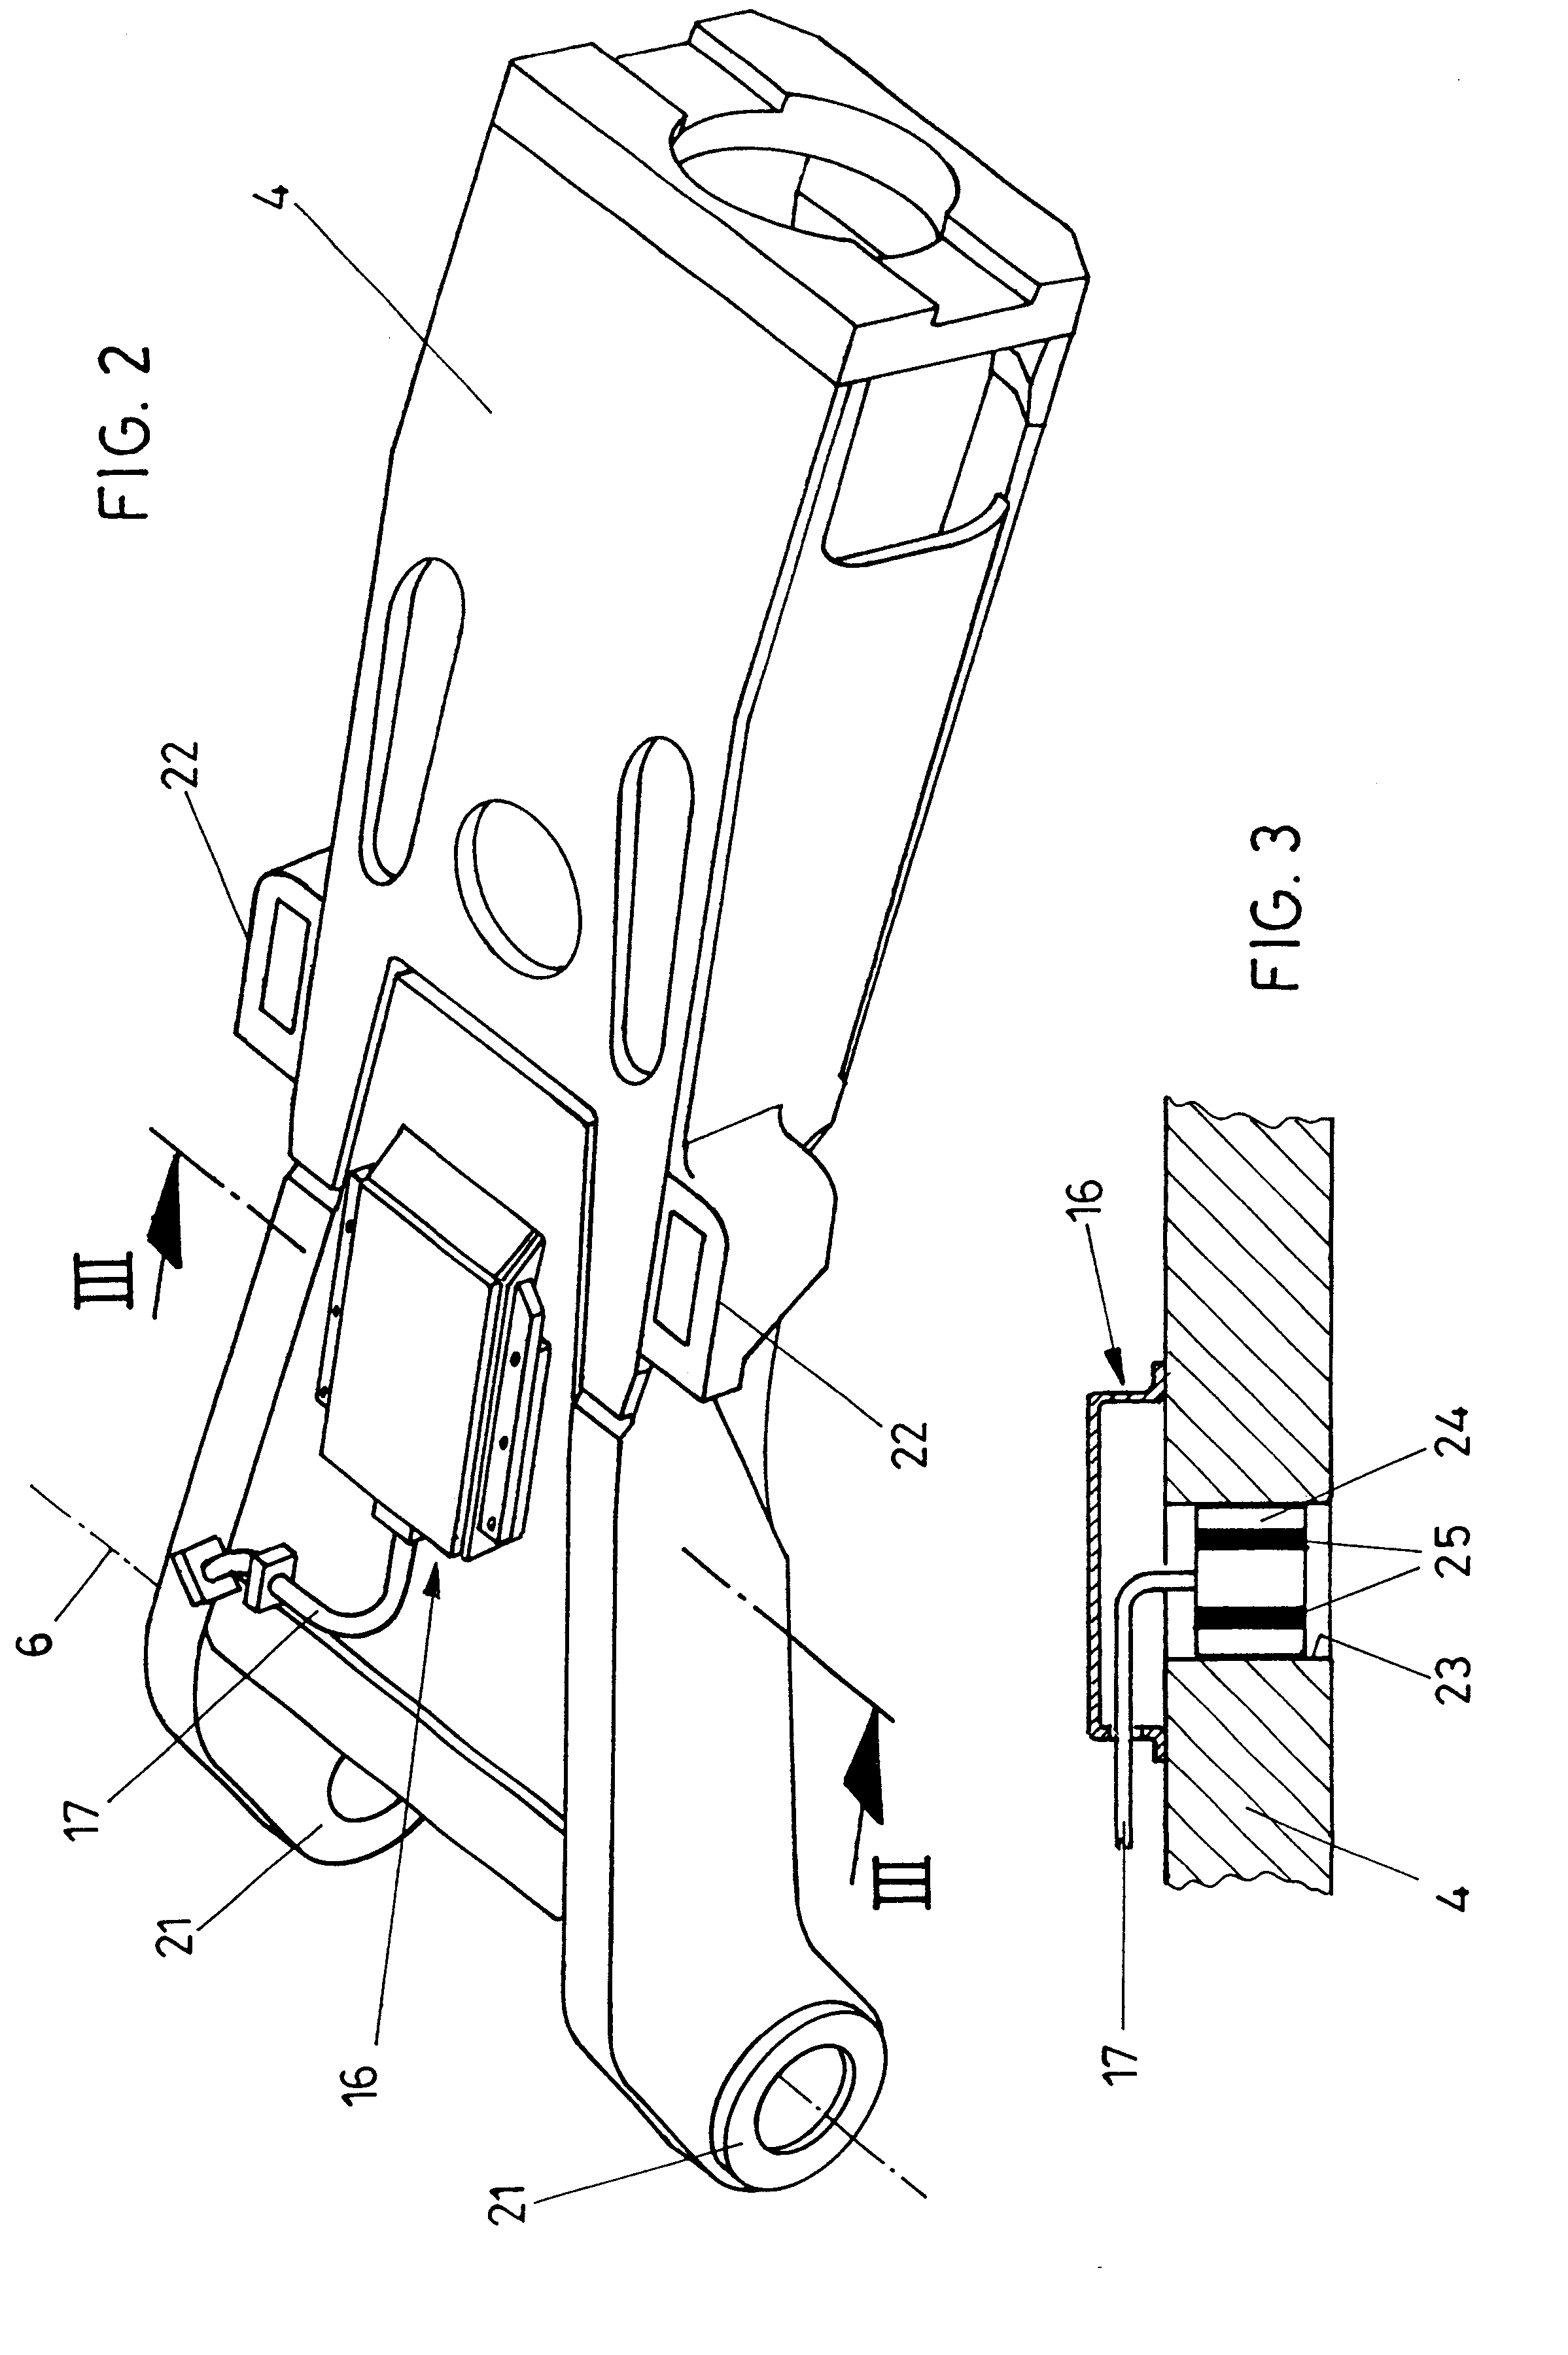 Device for protecting selective cutting machines against overload